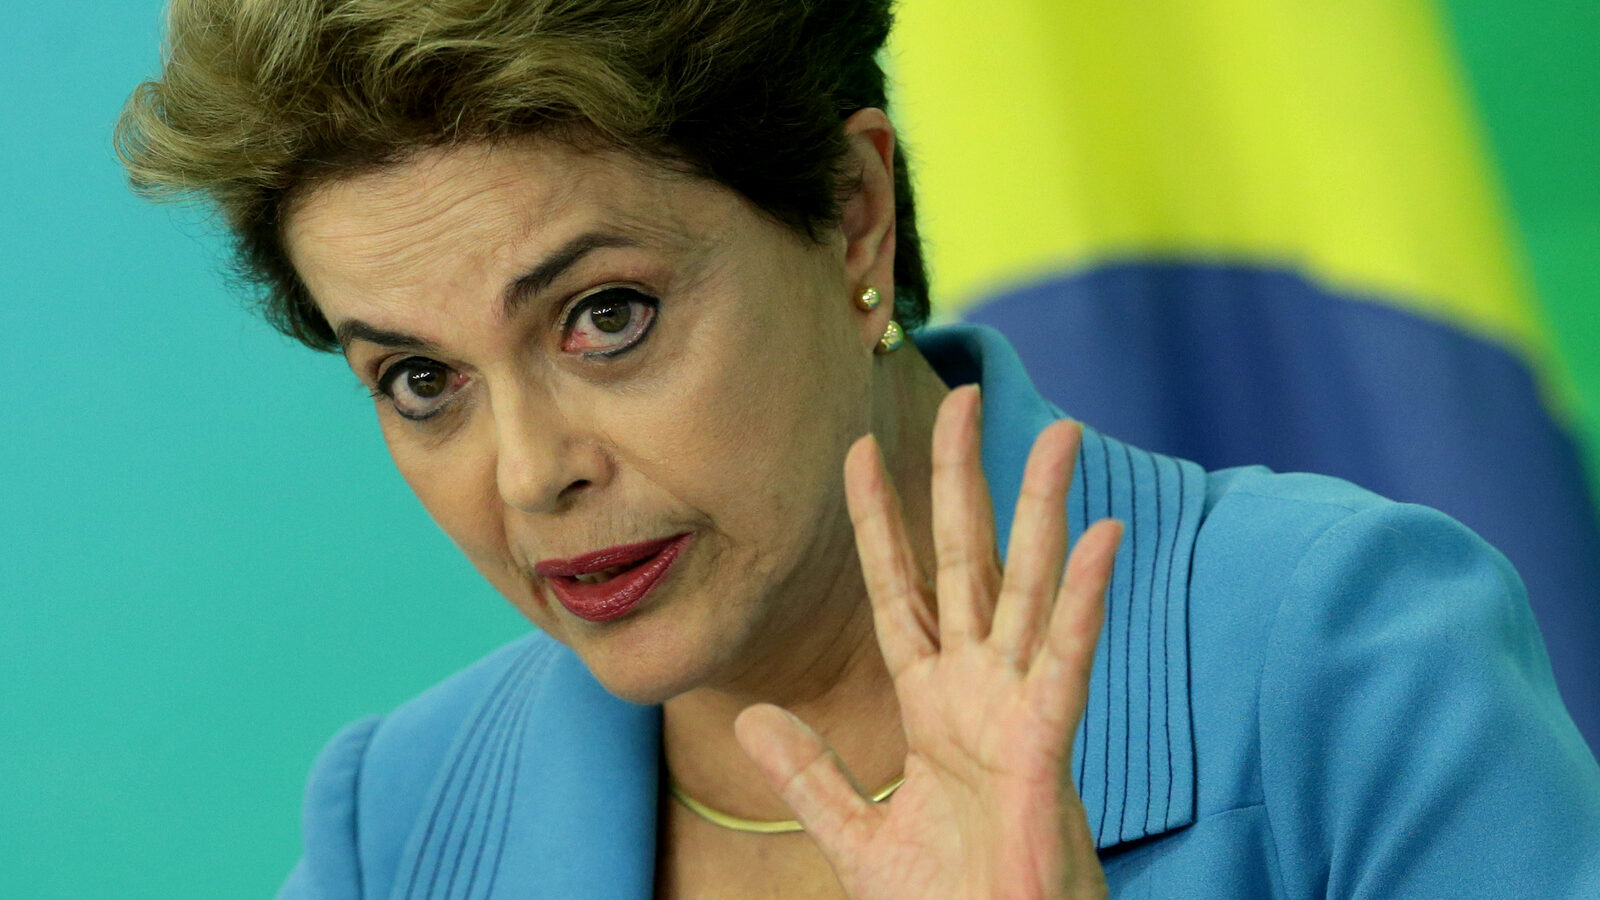 Brazil's President Dilma Rousseff speaks during a press conference about her impeachment process, at Planalto Presidential Palace, in Brasilia, Monday, April 18, 2016. President Rousseff appeared on the verge of losing office after a congressional vote to impeach her and signs suggested only tenuous support for her in the Senate, which will decide whether to remove her amid a political and economic crisis. (AP Photo/Eraldo Peres)